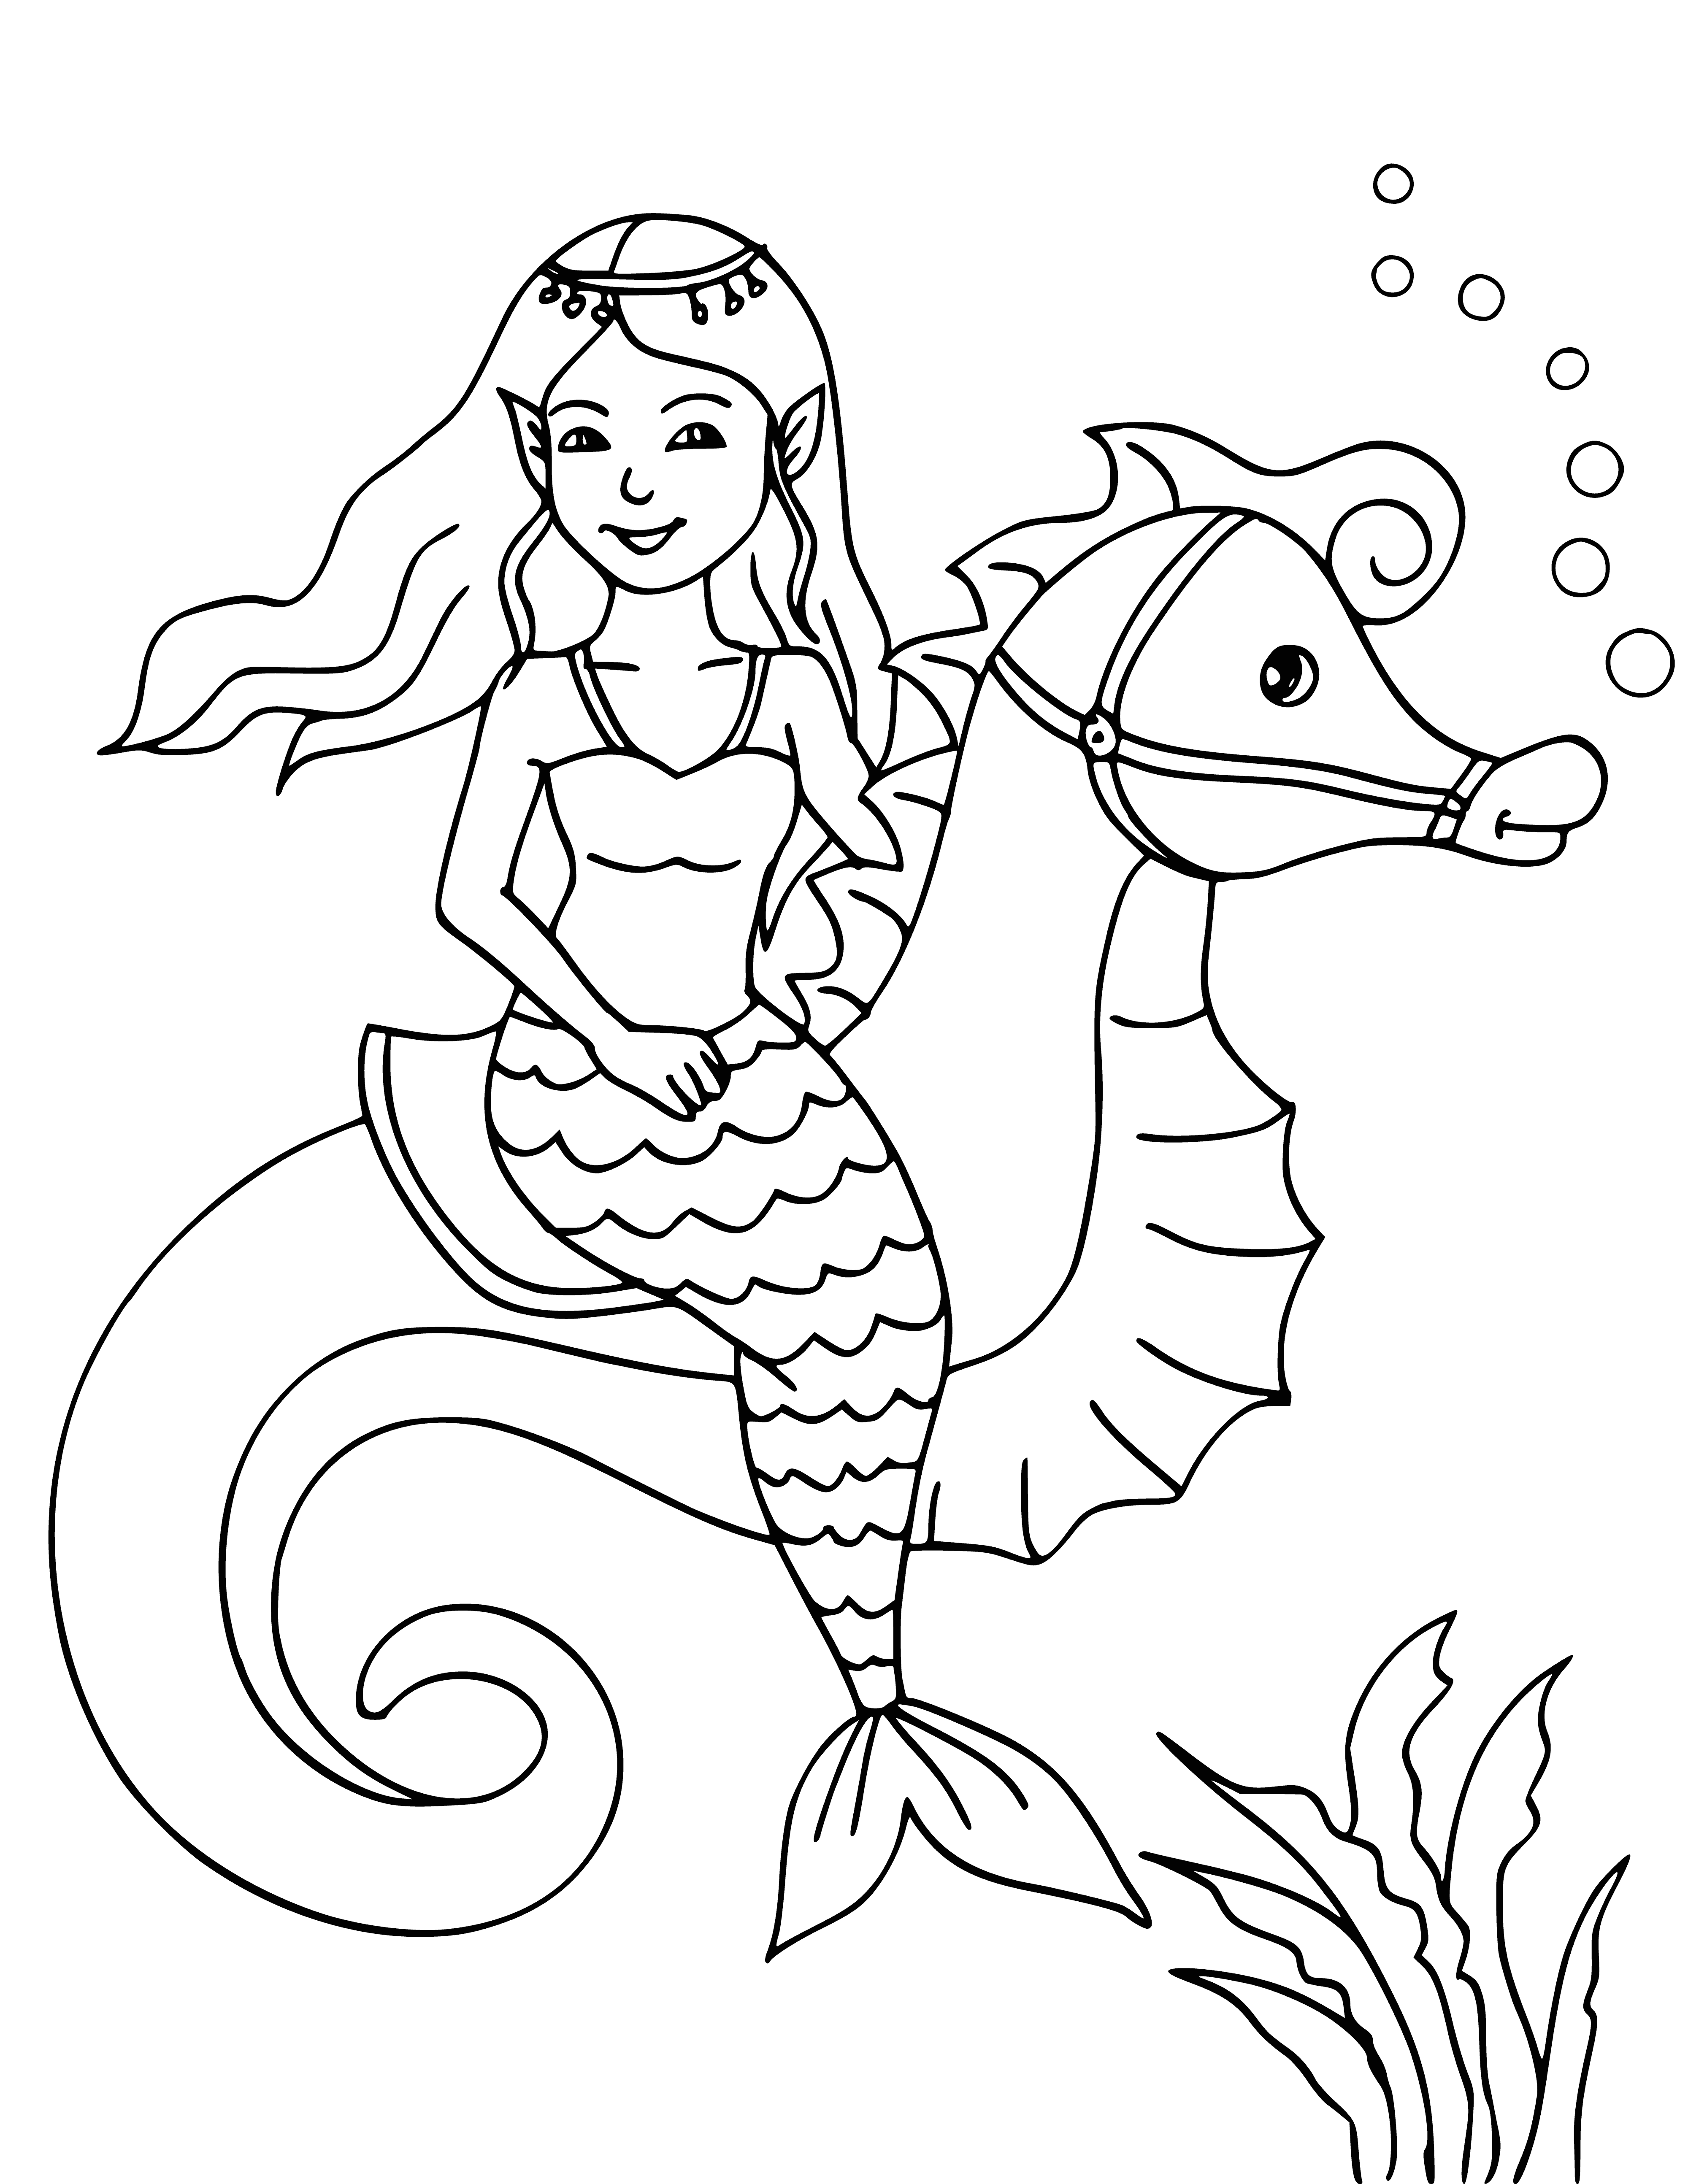 coloring page: Two magical creatures, a mermaid & a seahorse, swim together in an underwater world full of whimsy & delight.